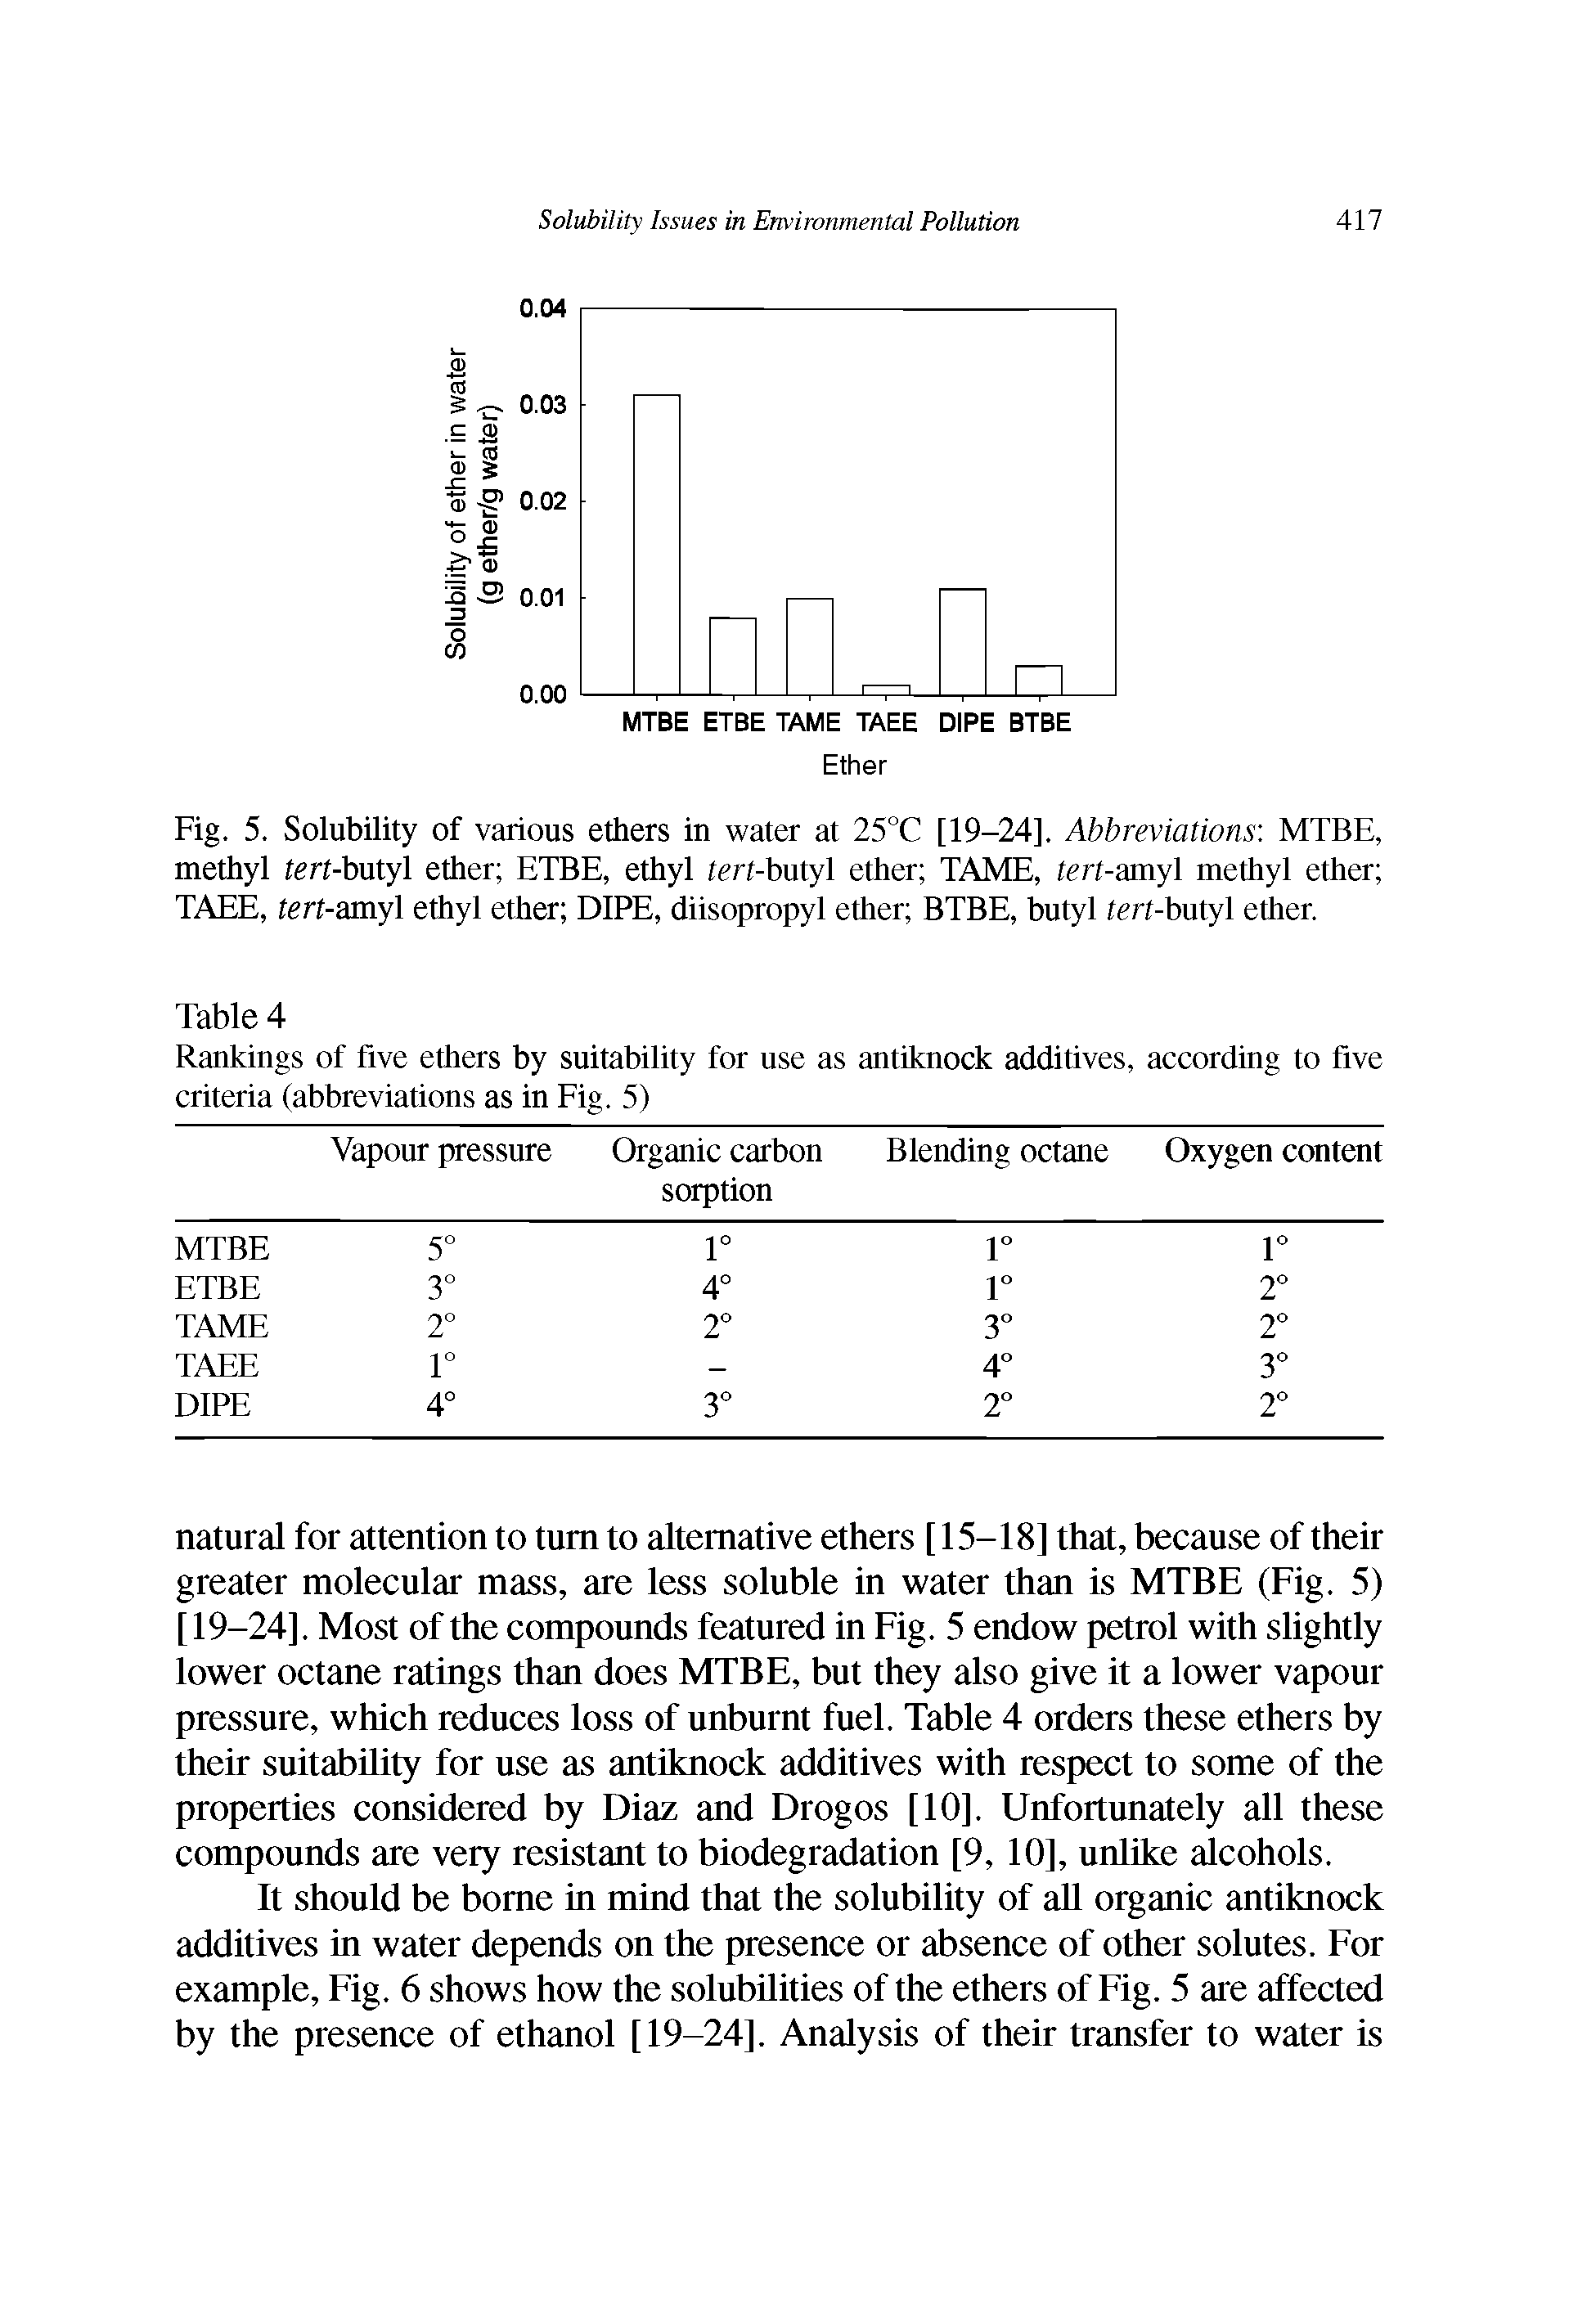 Fig. 5. Solubility of various ethers in water at 25°C [19-24], Abbreviations MTBE, methyl tert-butyl ether ETBE, ethyl iert-butyl ether TAME, tert-amyl methyl ether TAEE, tert-amy ethyl ether DIPE, diisopropyl ether BTBE, butyl iert-butyl ether.